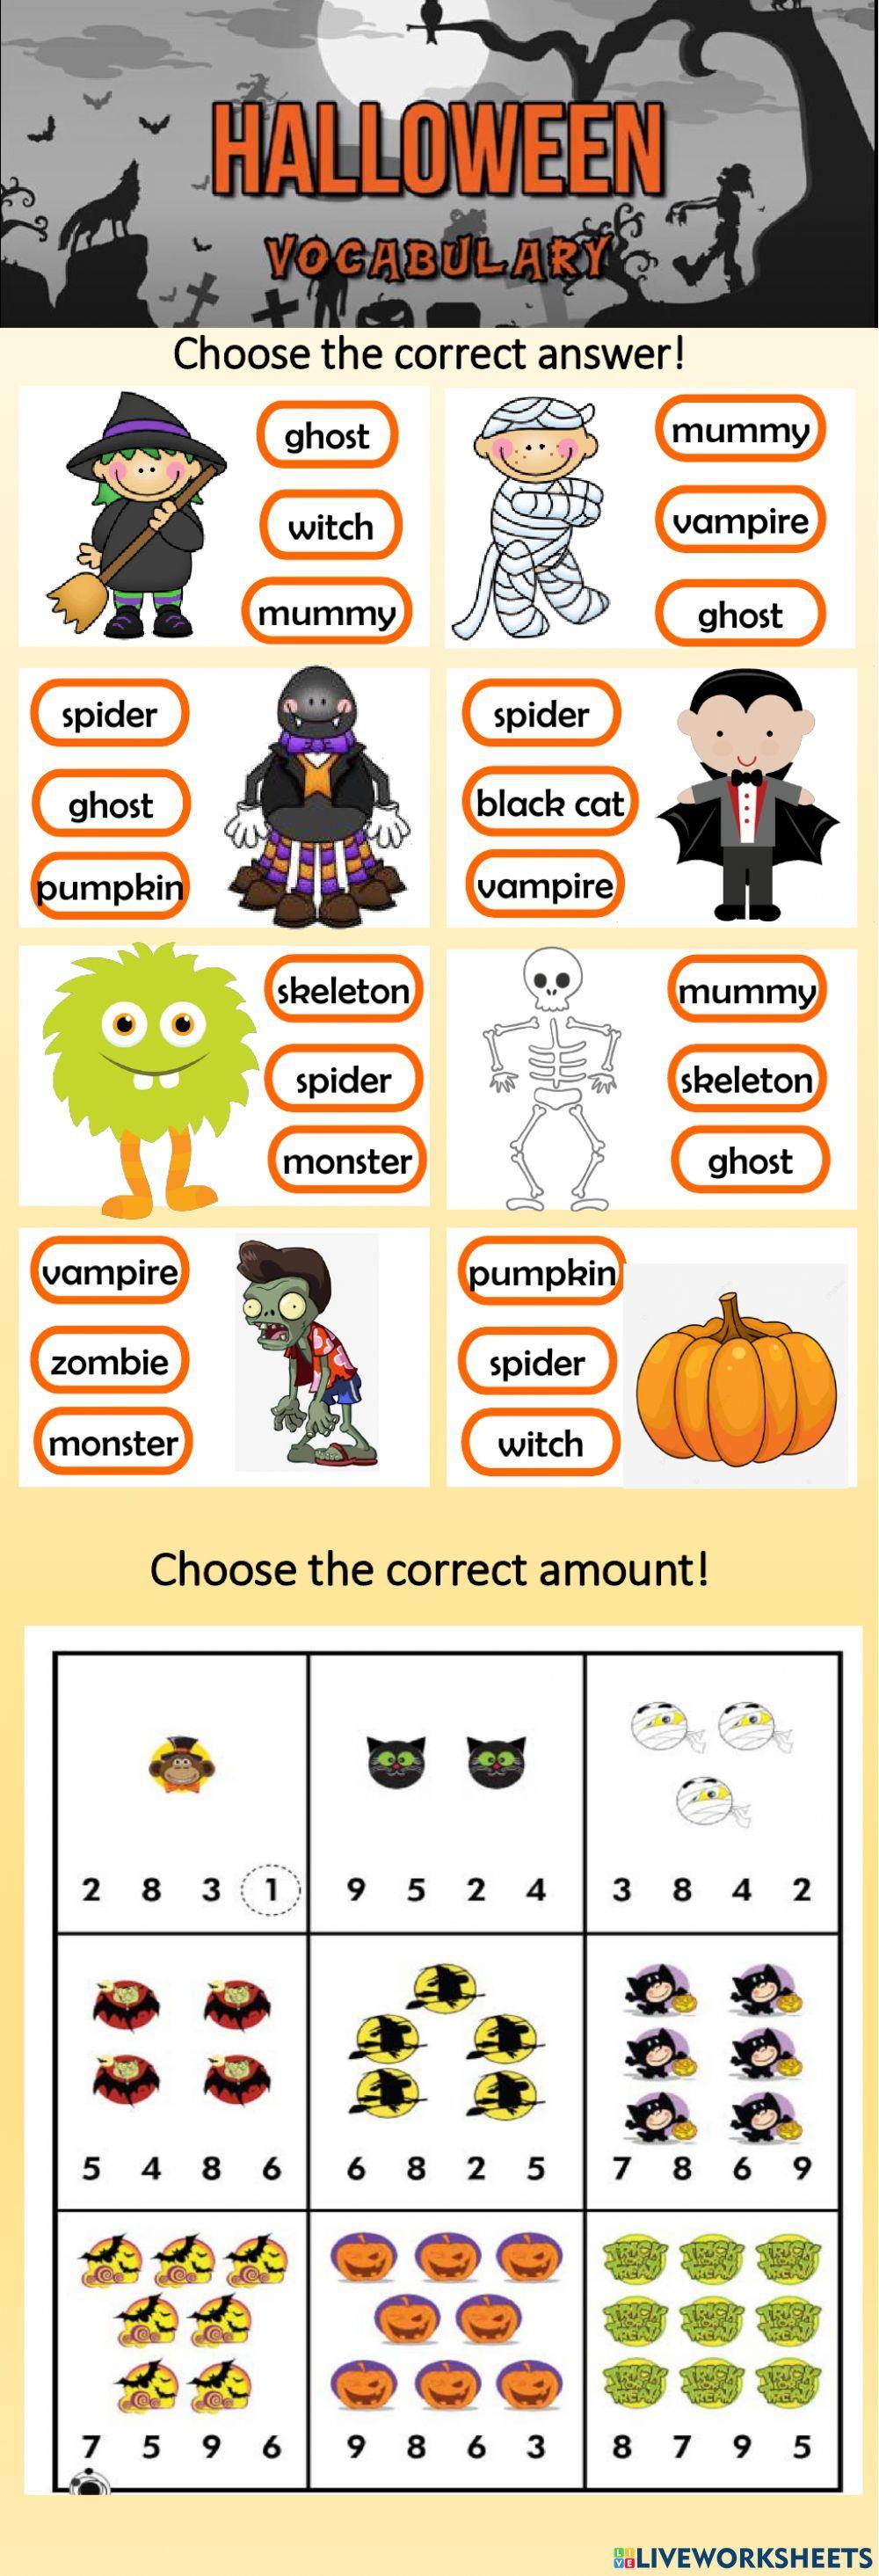 Halloween vocabulary and counting